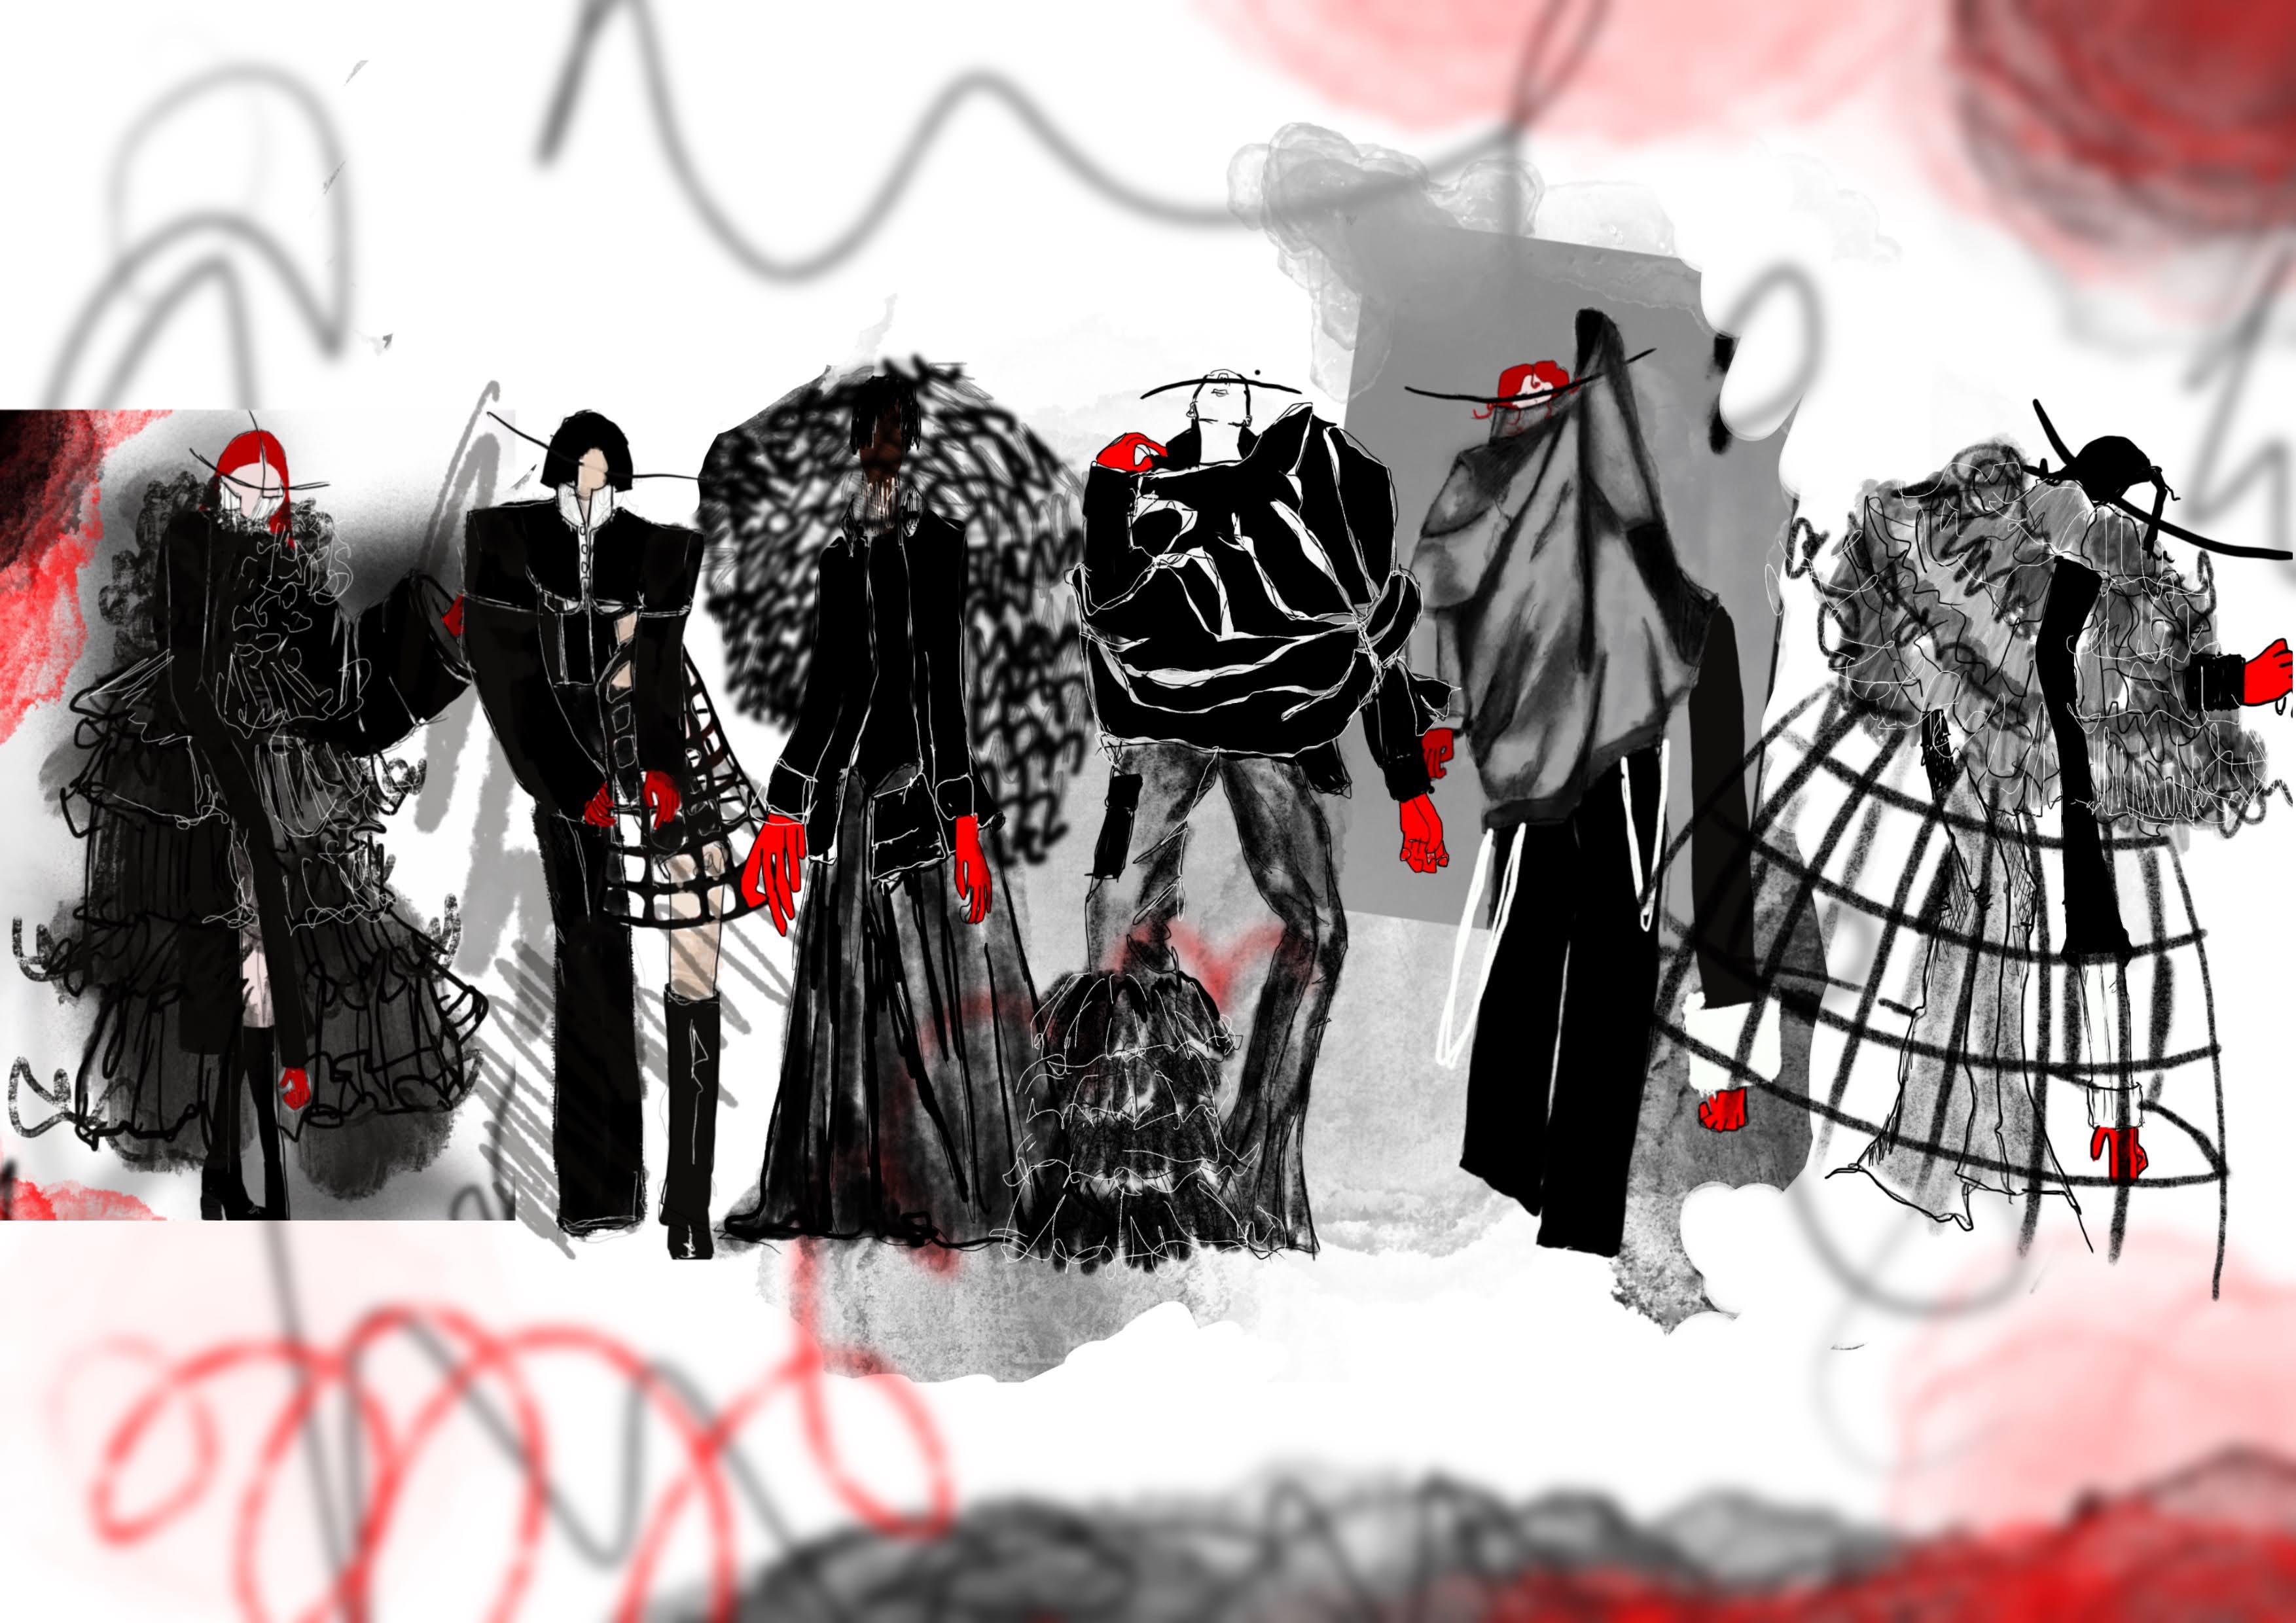 Final line up for my graduate collection, There's A Party In My Mind. A line of mixed media distorted illustrations.